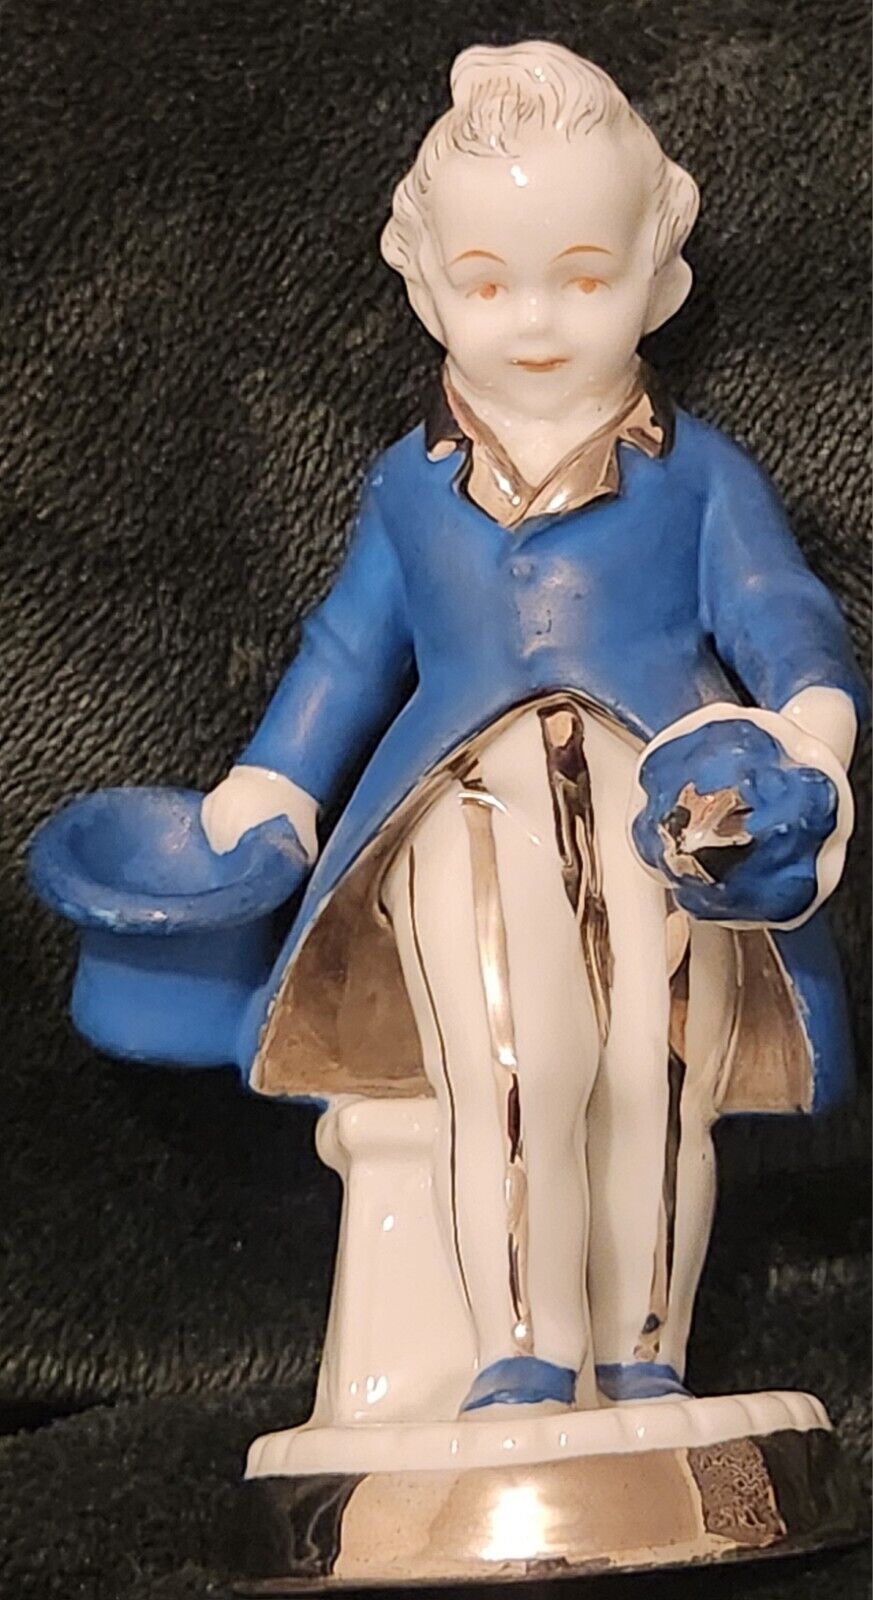 RARE Antique Porcelain Boy In Blue With Silver Accents. Unknown Marking